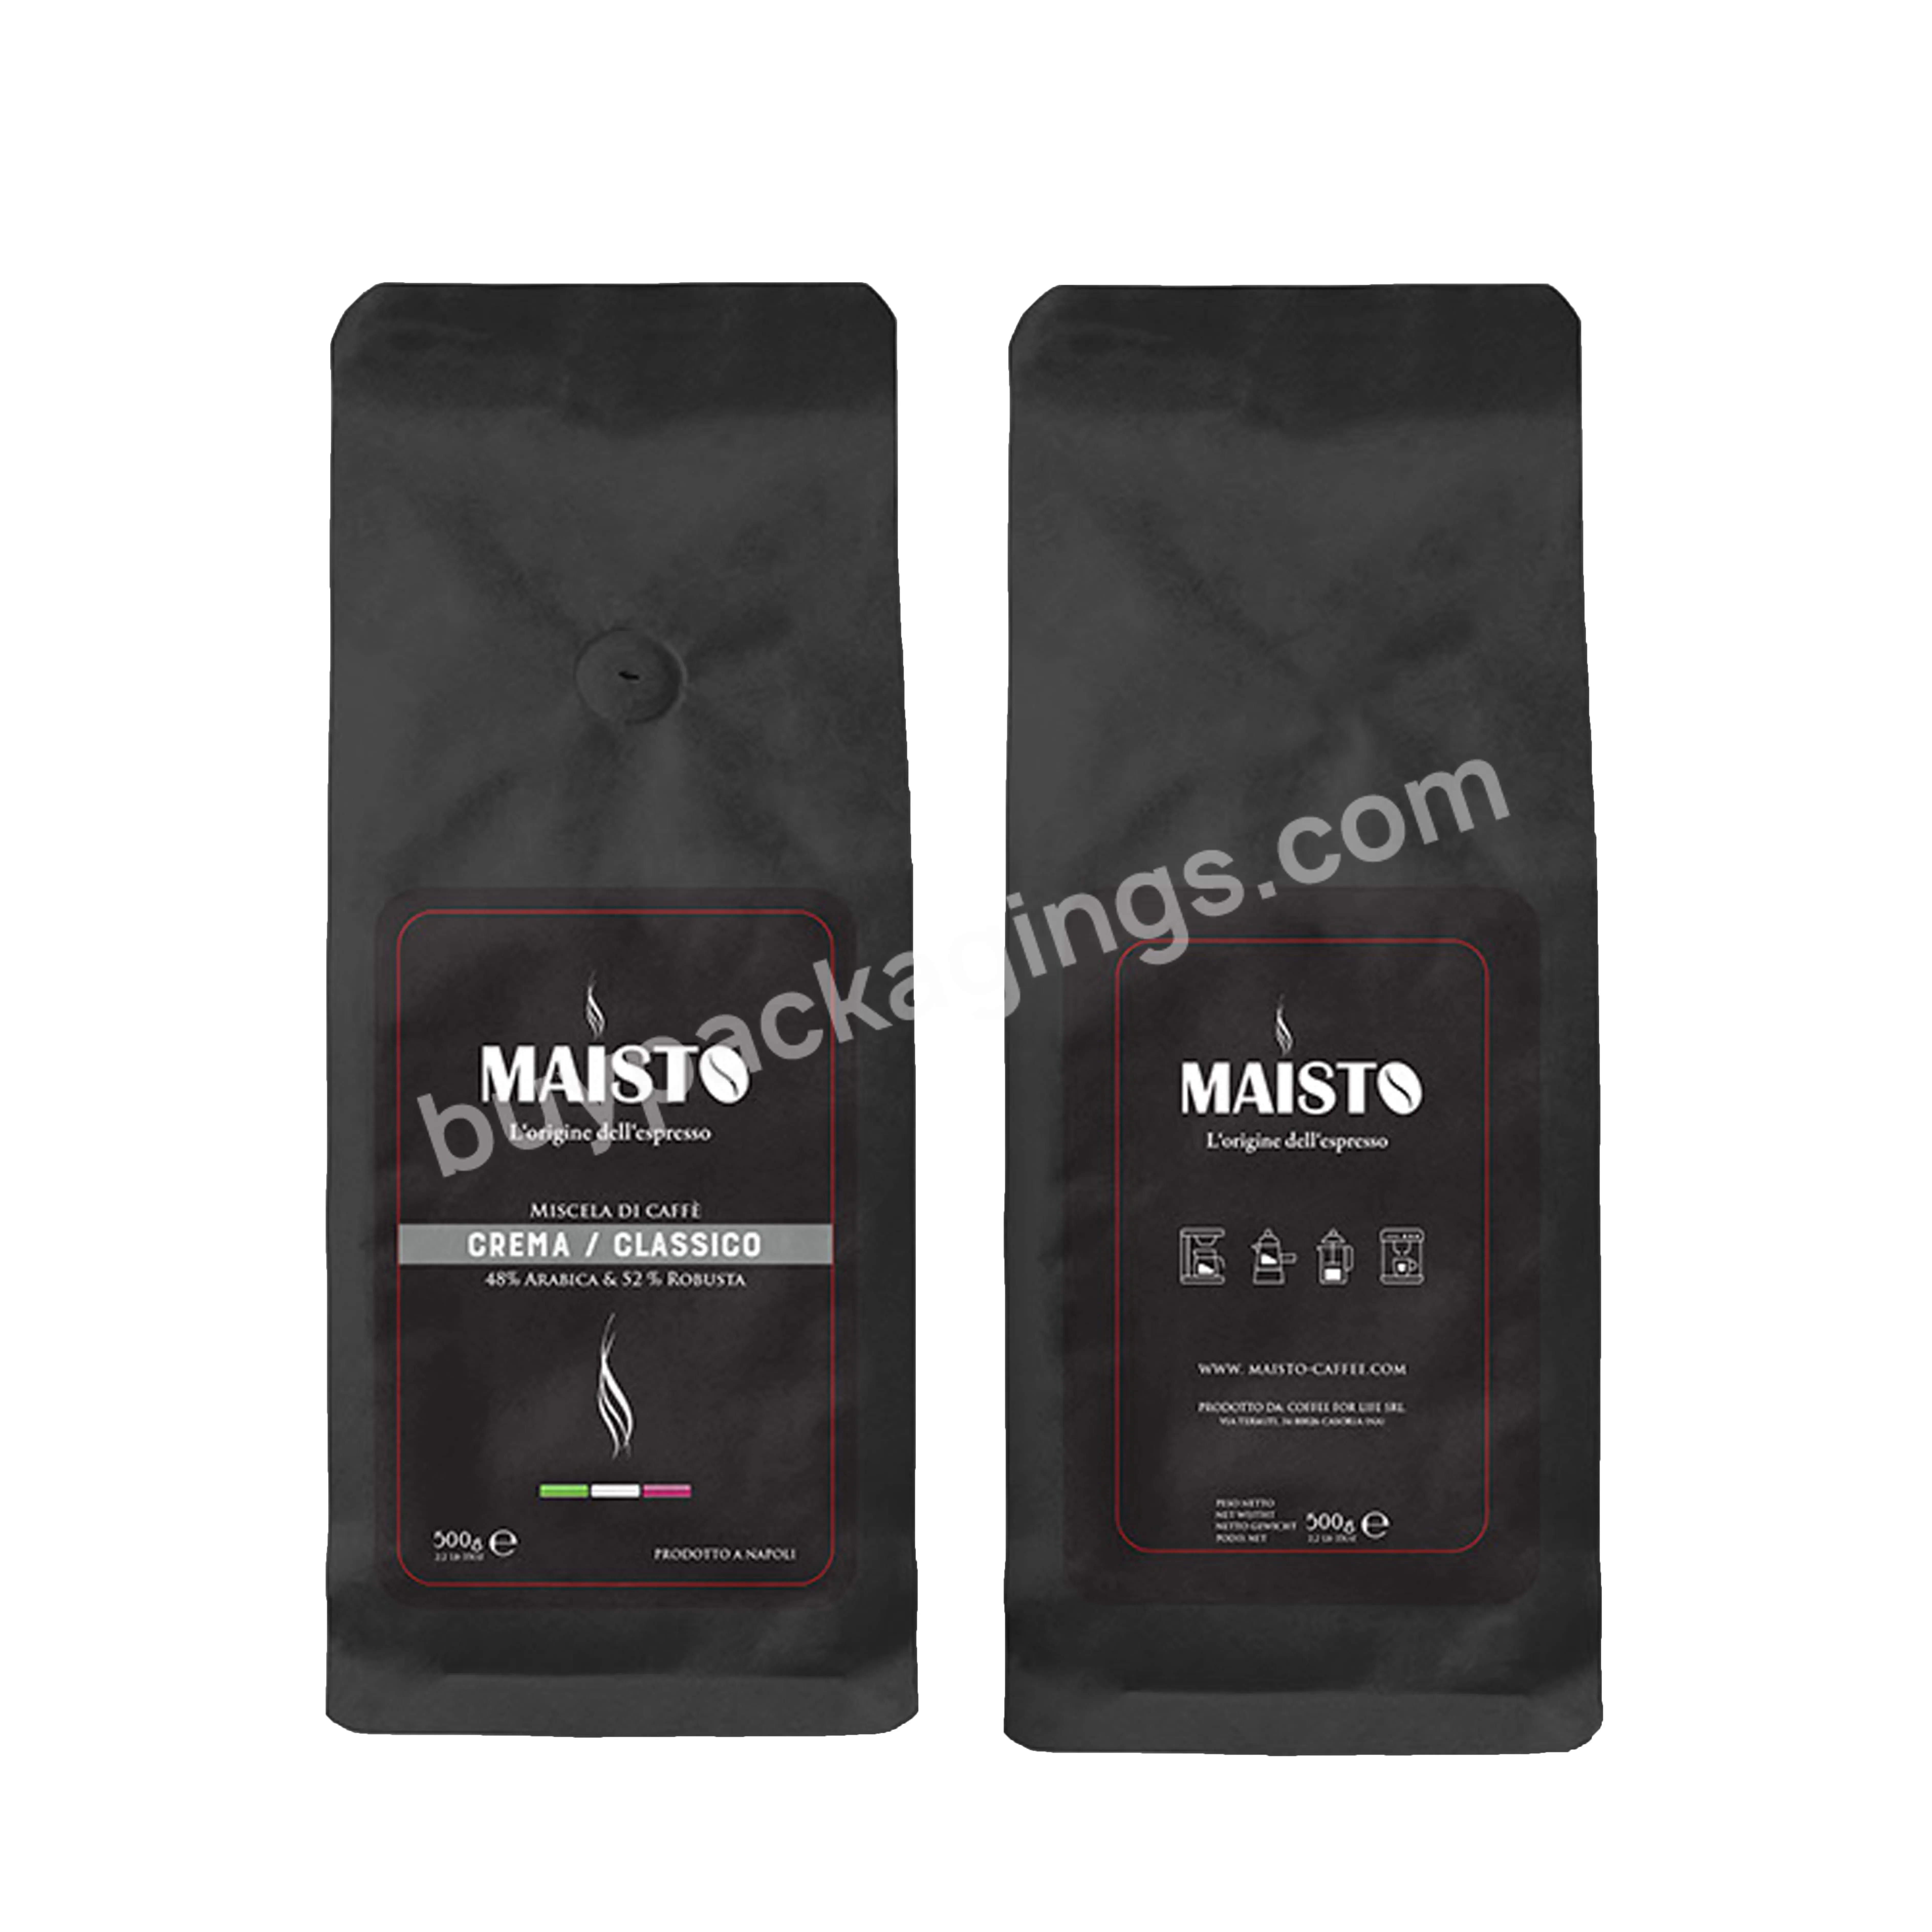 Food Grade Coffee Pouch Private Label Black Coffee Pouch 7.8x4.5 Beans Packaging Box Bags Ldpe Pouch For Coffee With Zipper - Buy Black Coffee Pouch 7.8x4.5,Coffee Pouch Private Label,Ldpe Pouch For Coffee.